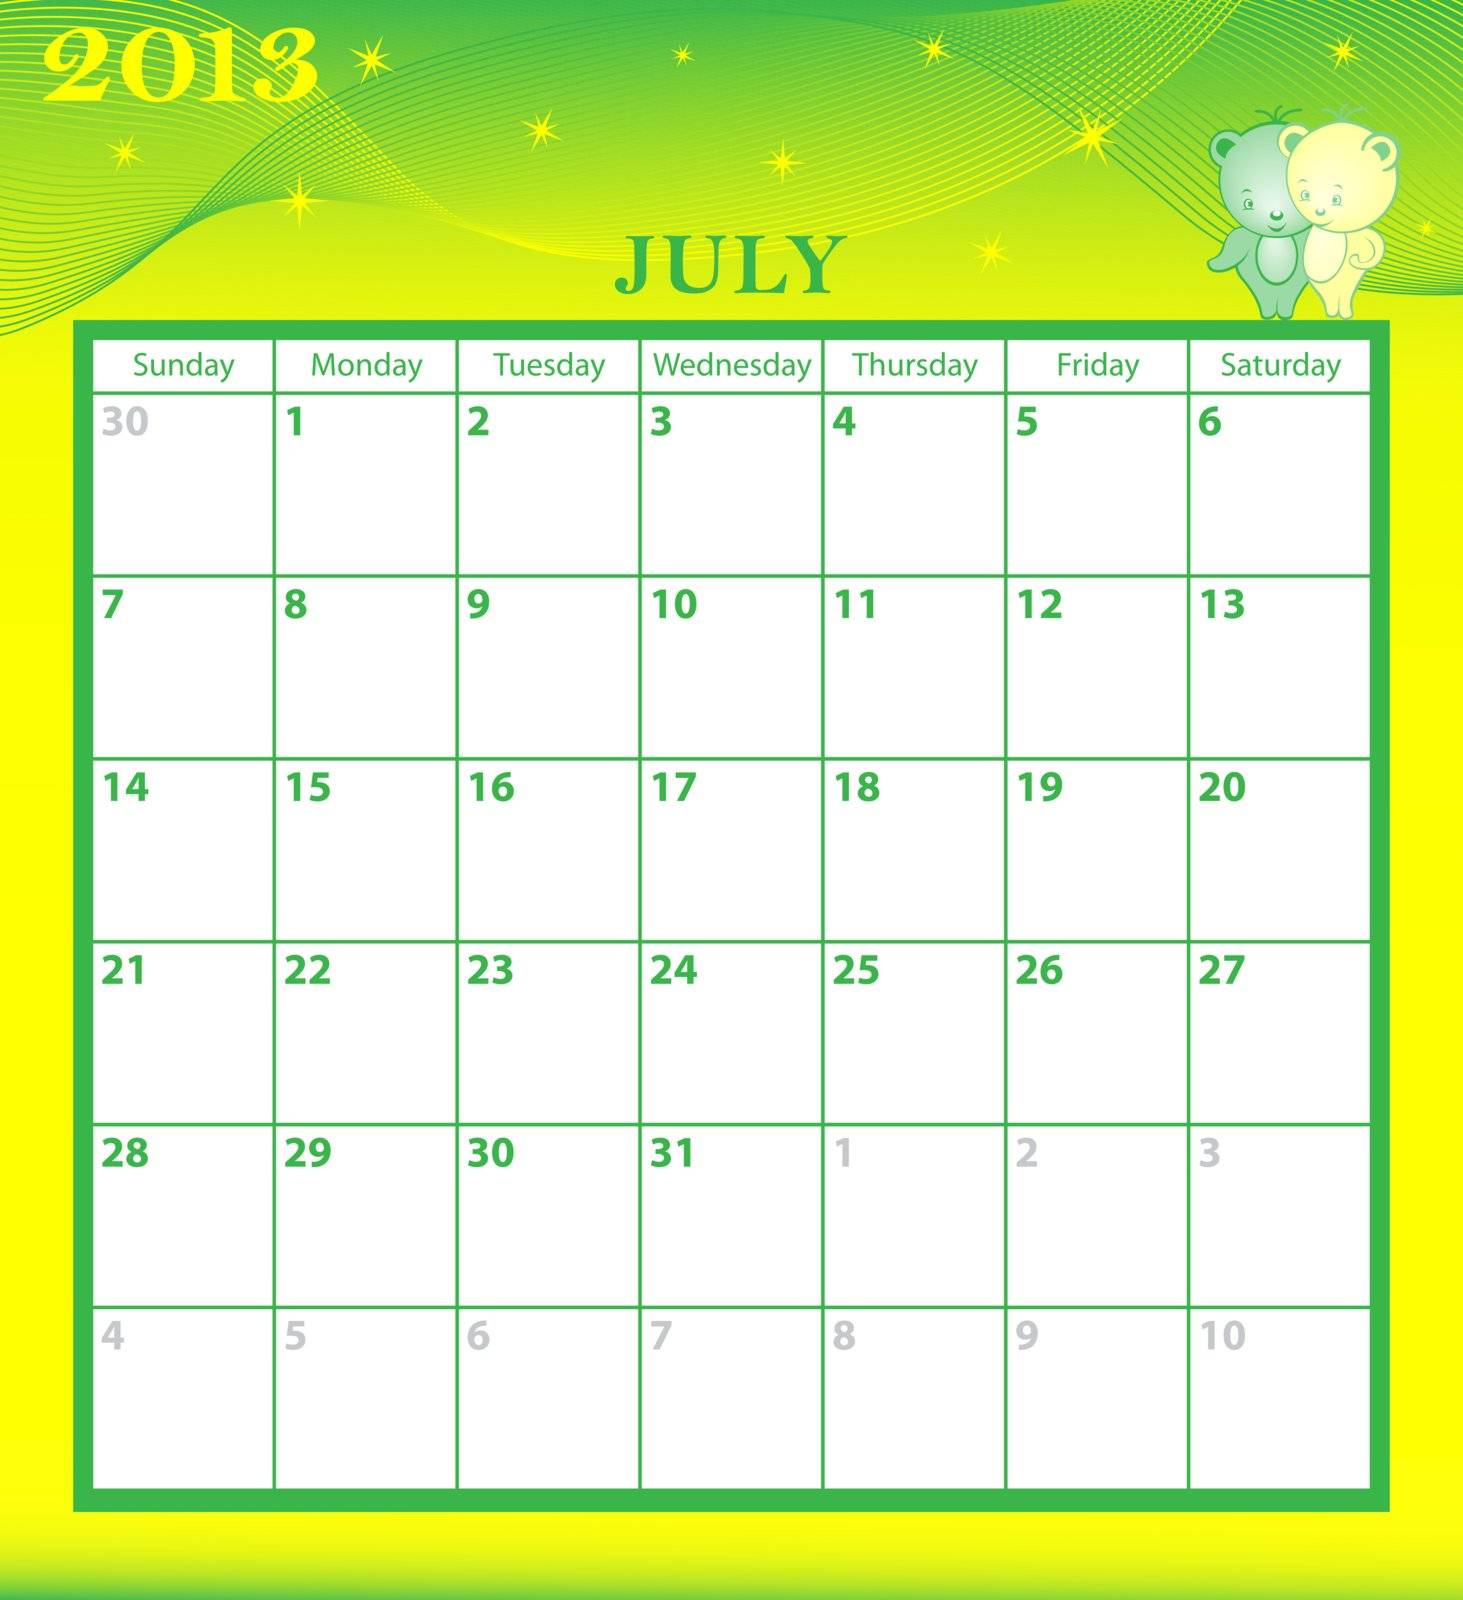 Calendar 2013 July by toots